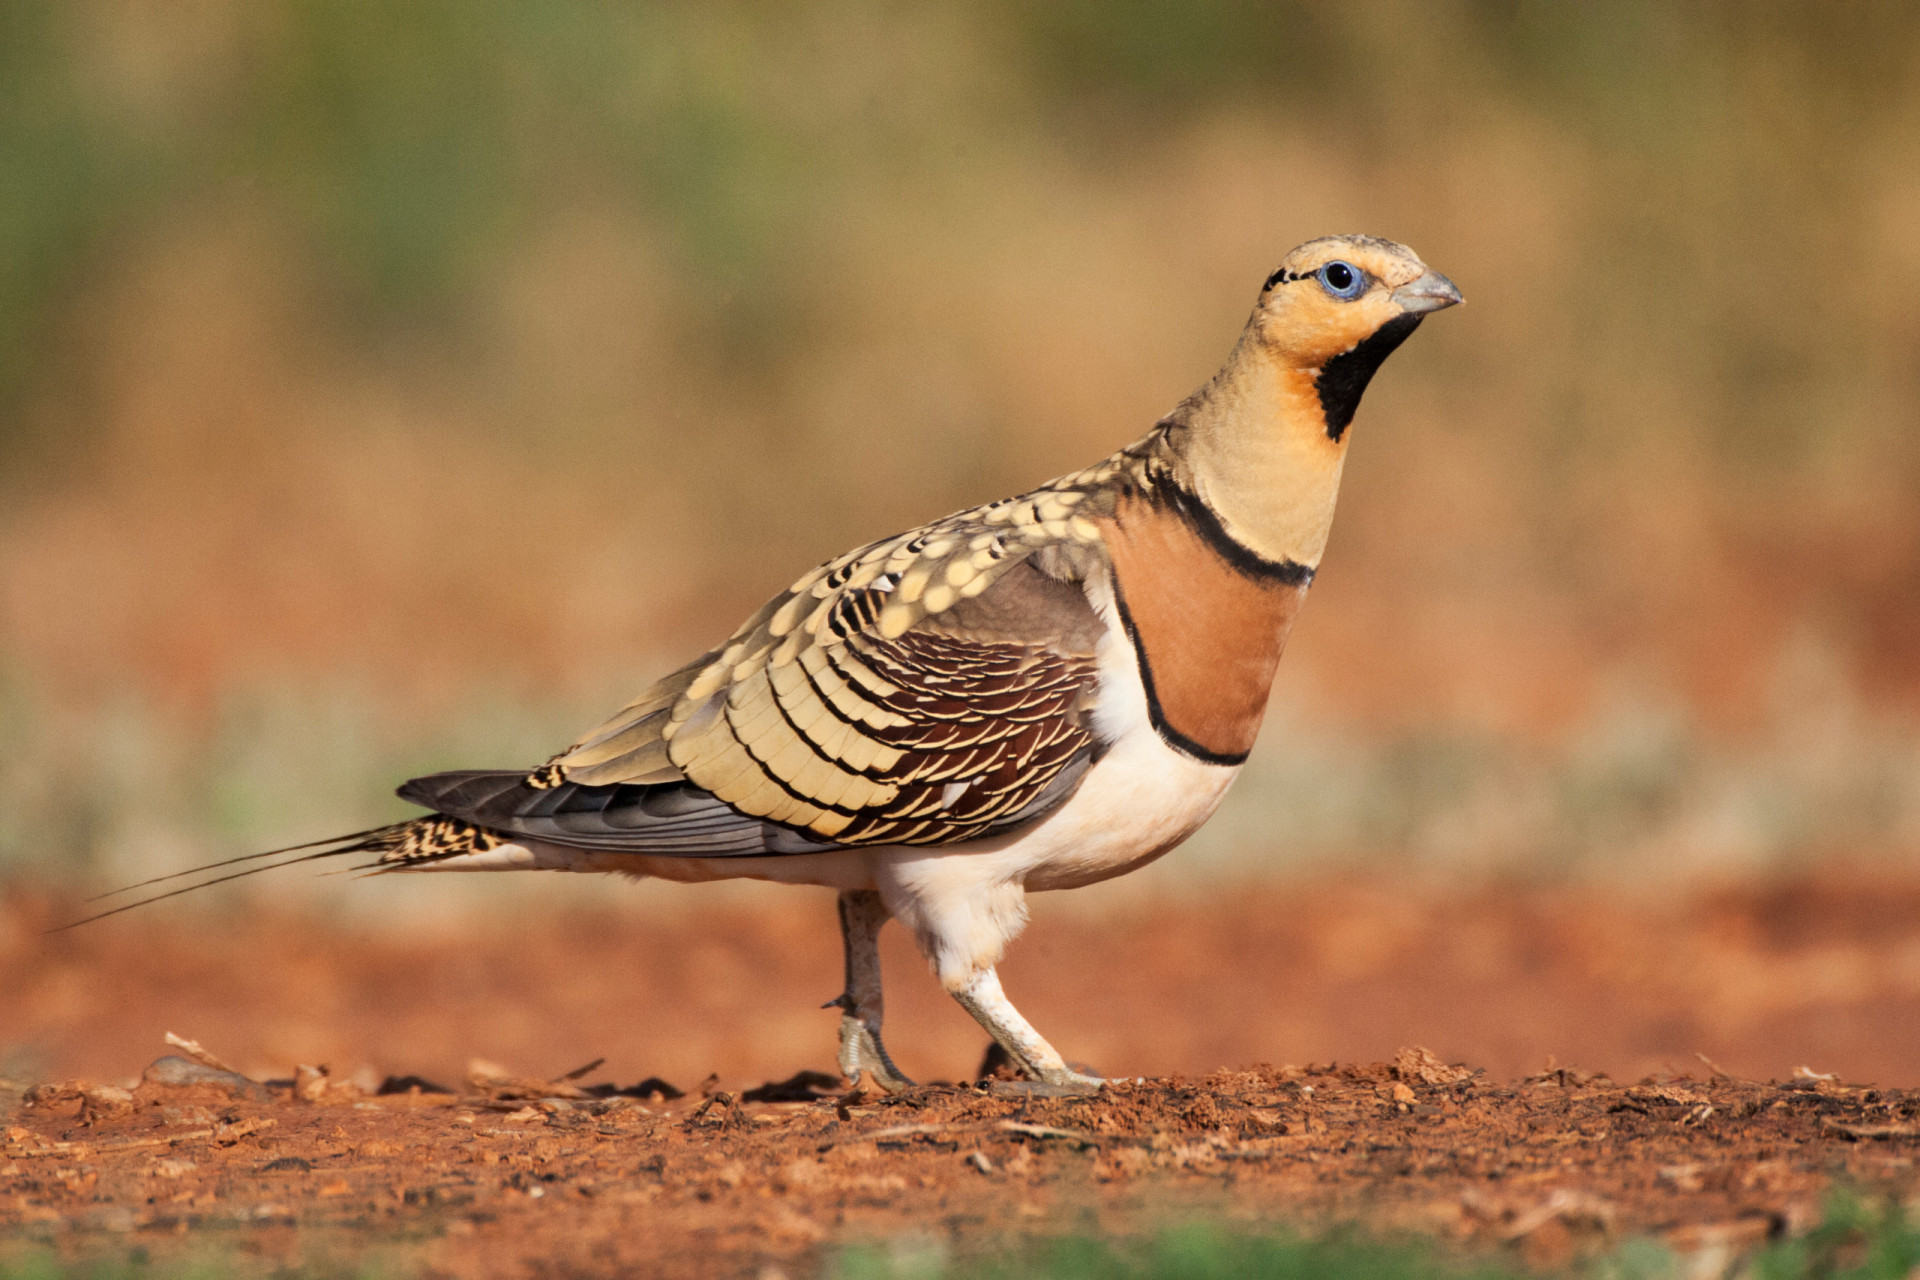 <p>Despite its harsh and arid outlook, the Tabernas Desert is home to a variety of flora and fauna. Birdlife is particularly abundant. The pin-tailed sandgrouse, for example, is perfectly adapted to the dry conditions.</p><p>You may also like:<a href="https://www.starsinsider.com/n/294998?utm_source=msn.com&utm_medium=display&utm_campaign=referral_description&utm_content=570754en-en"> Why people dislike Anne Hathaway (and how she's dealt with the "Hathahate")</a></p>